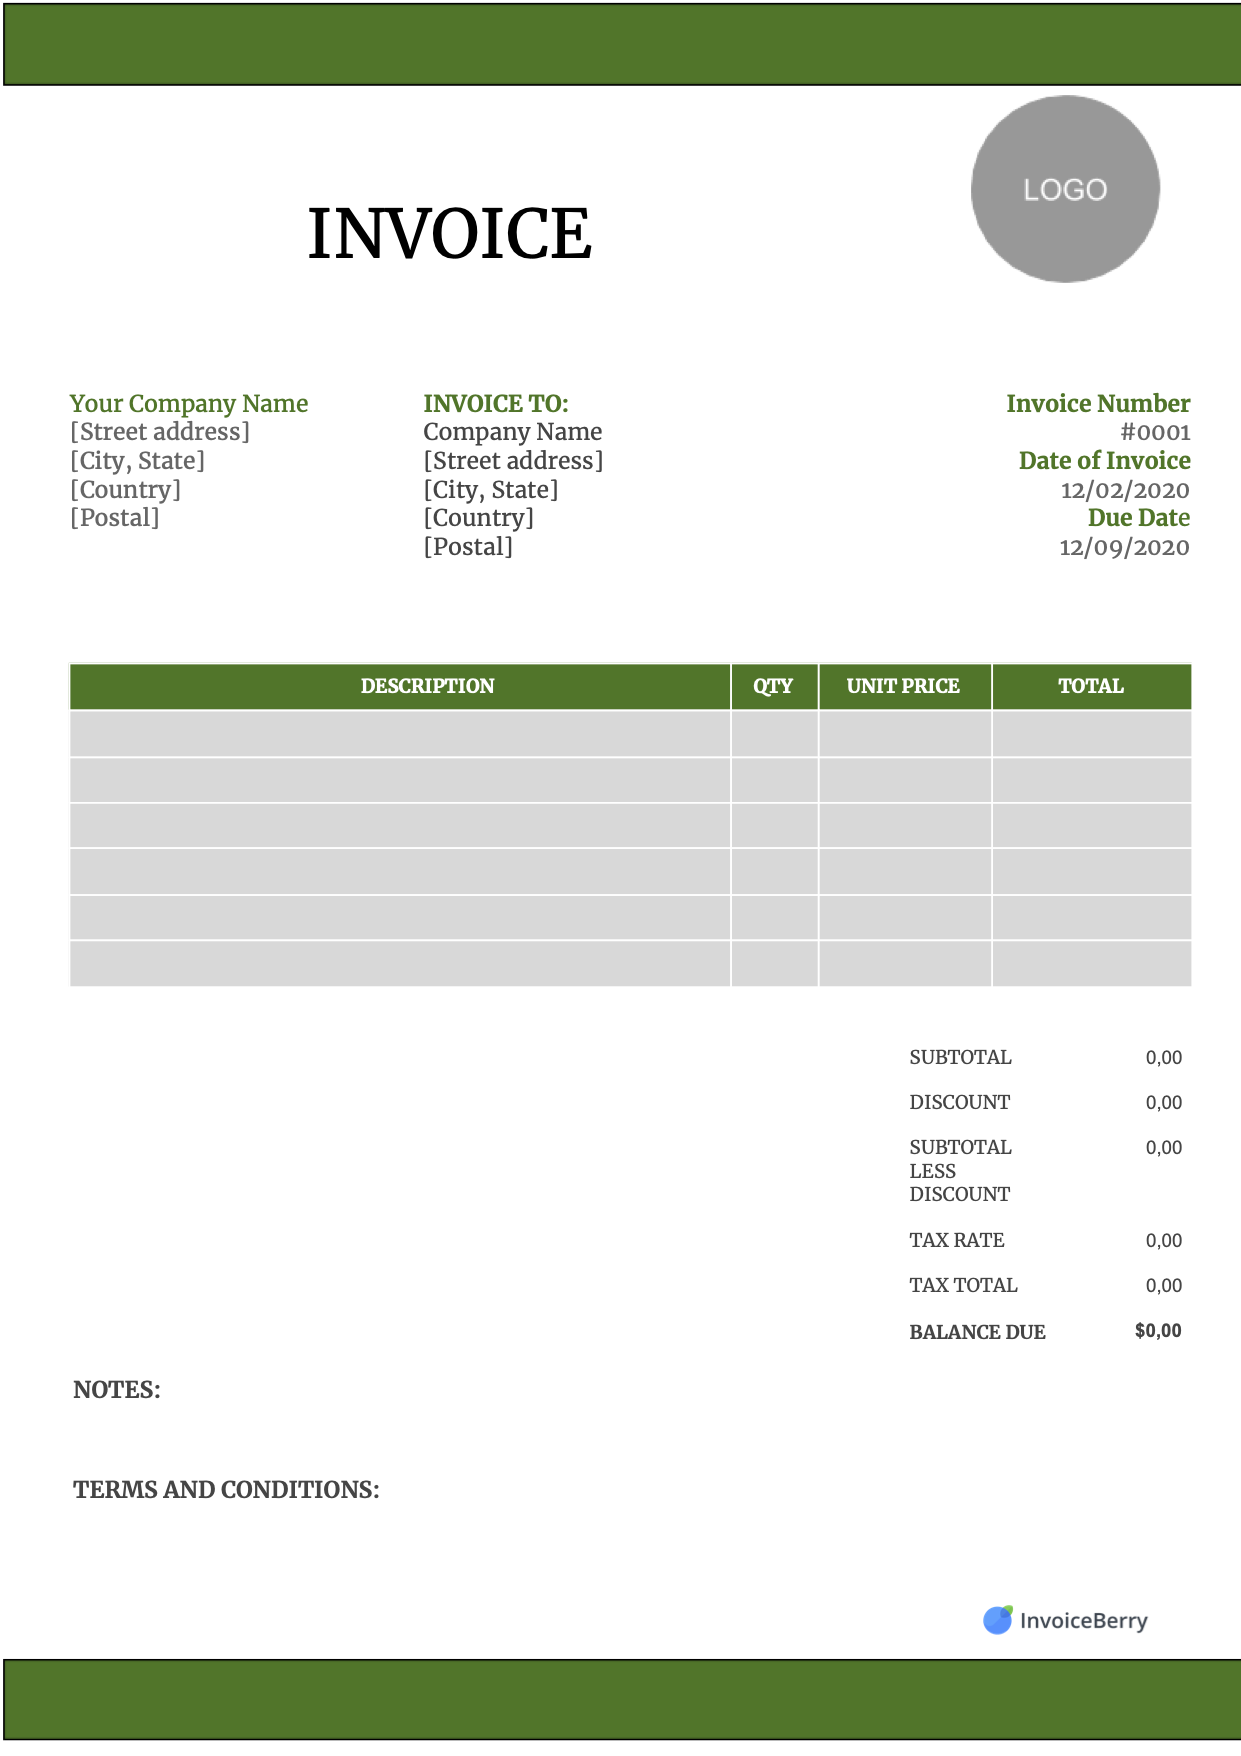 simple invoice template free word